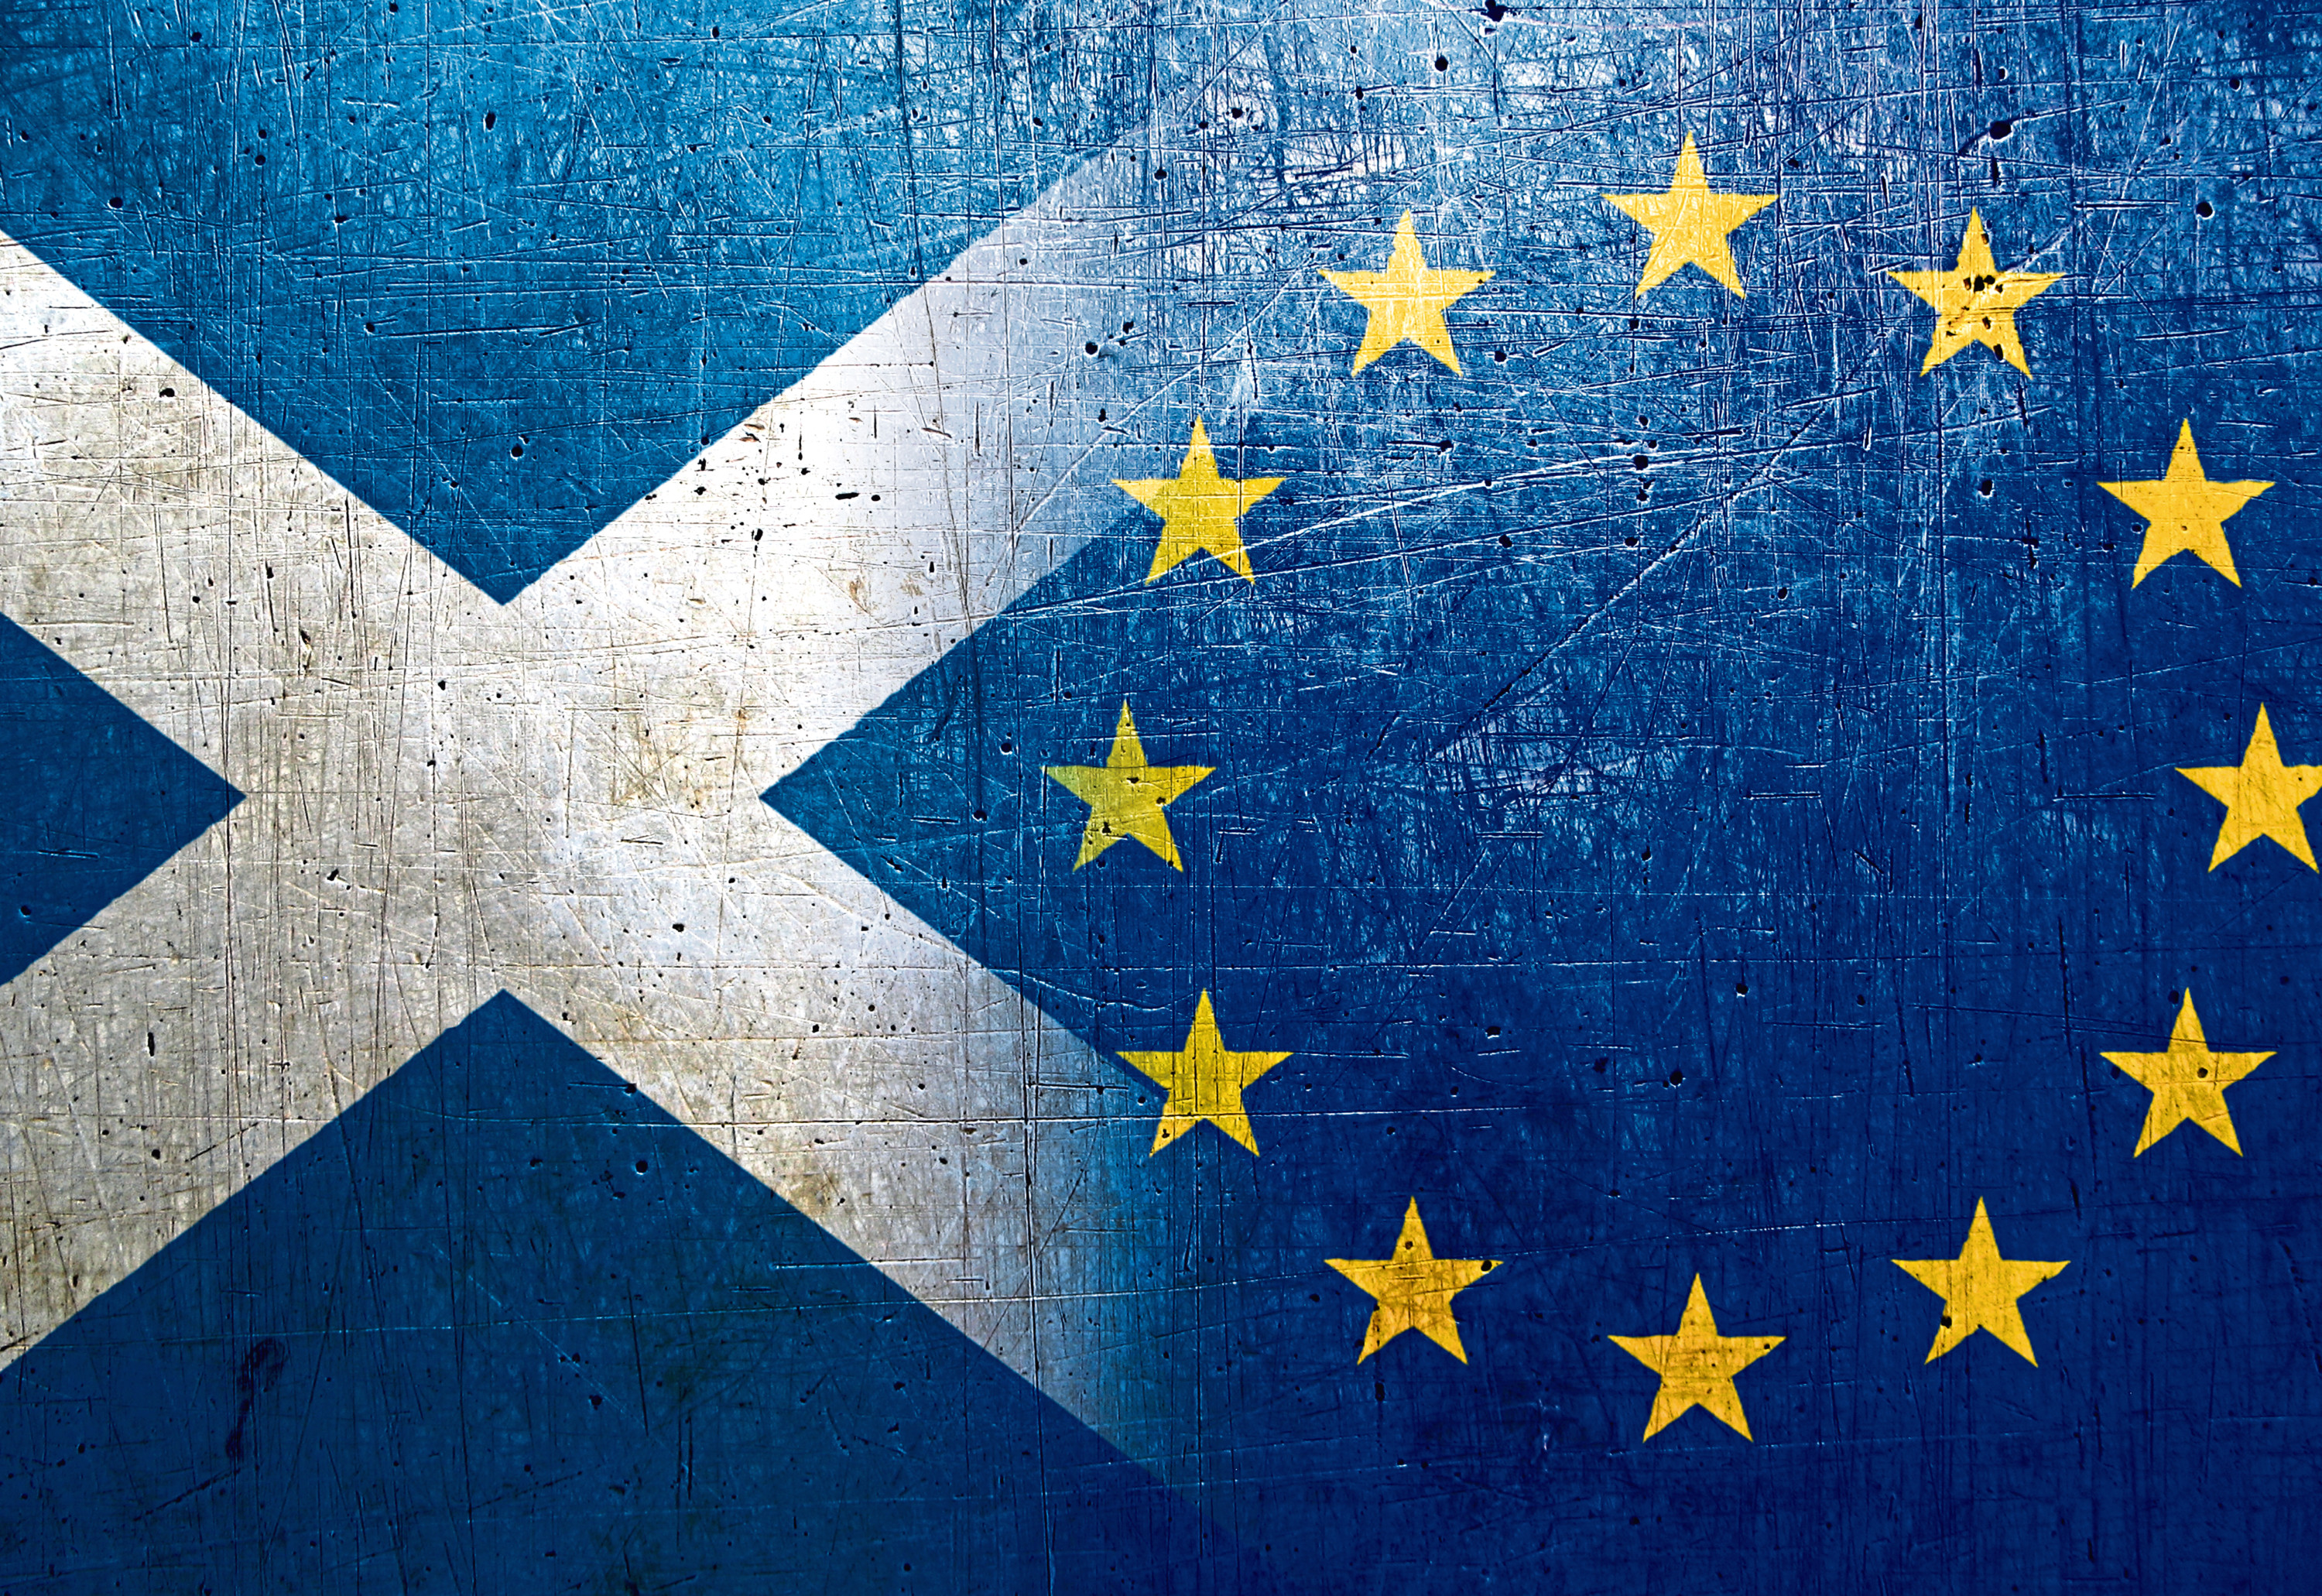 National flags on the grunge metal background
scotland
europe flag
2407